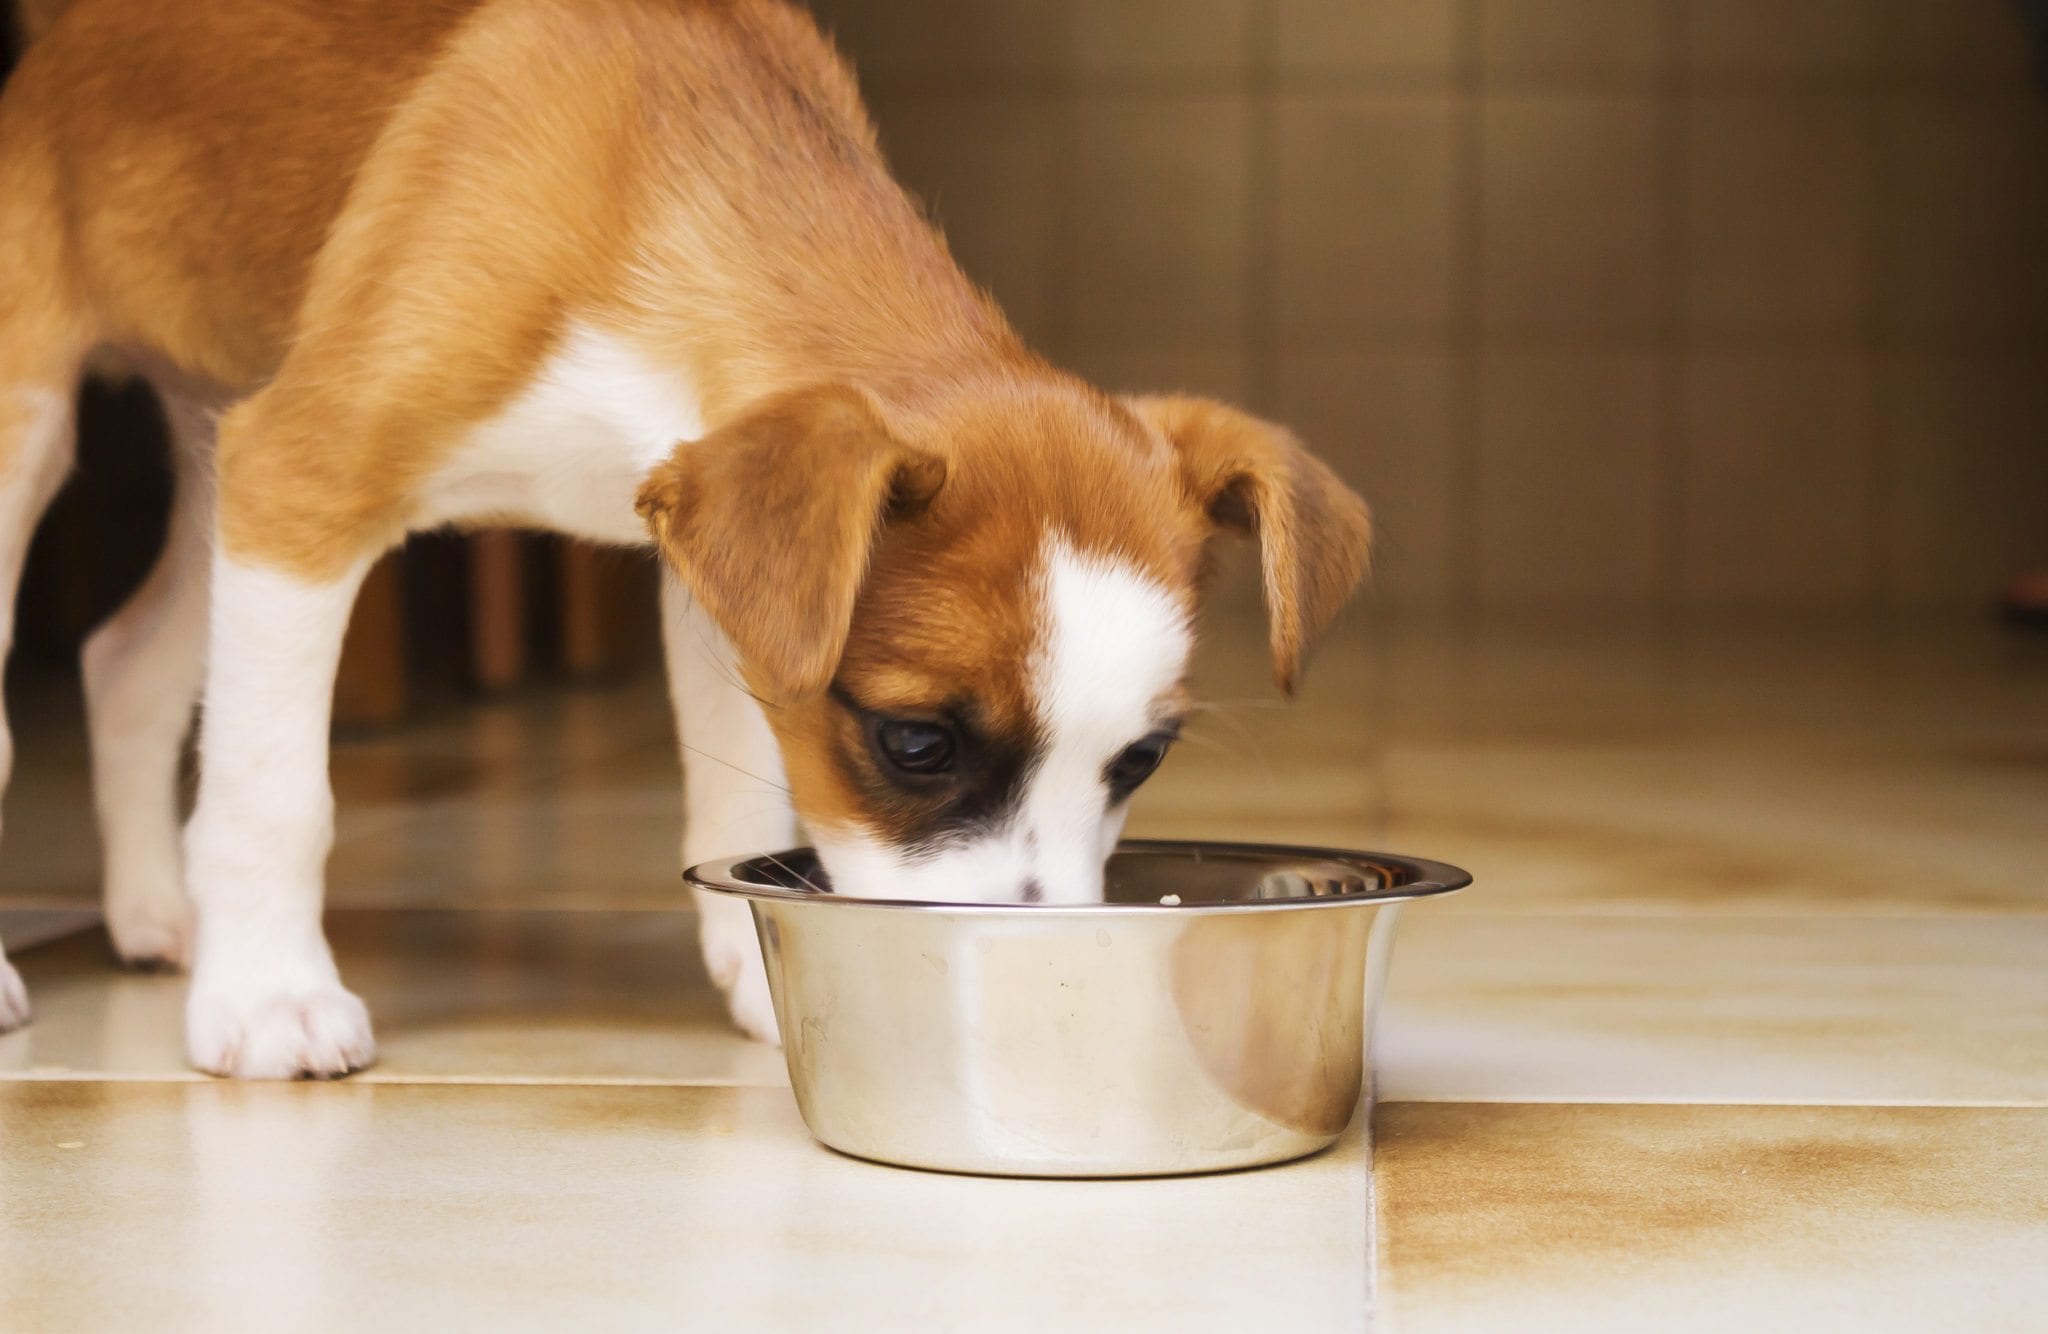 a tan and white puppy eating food from a metal bowl